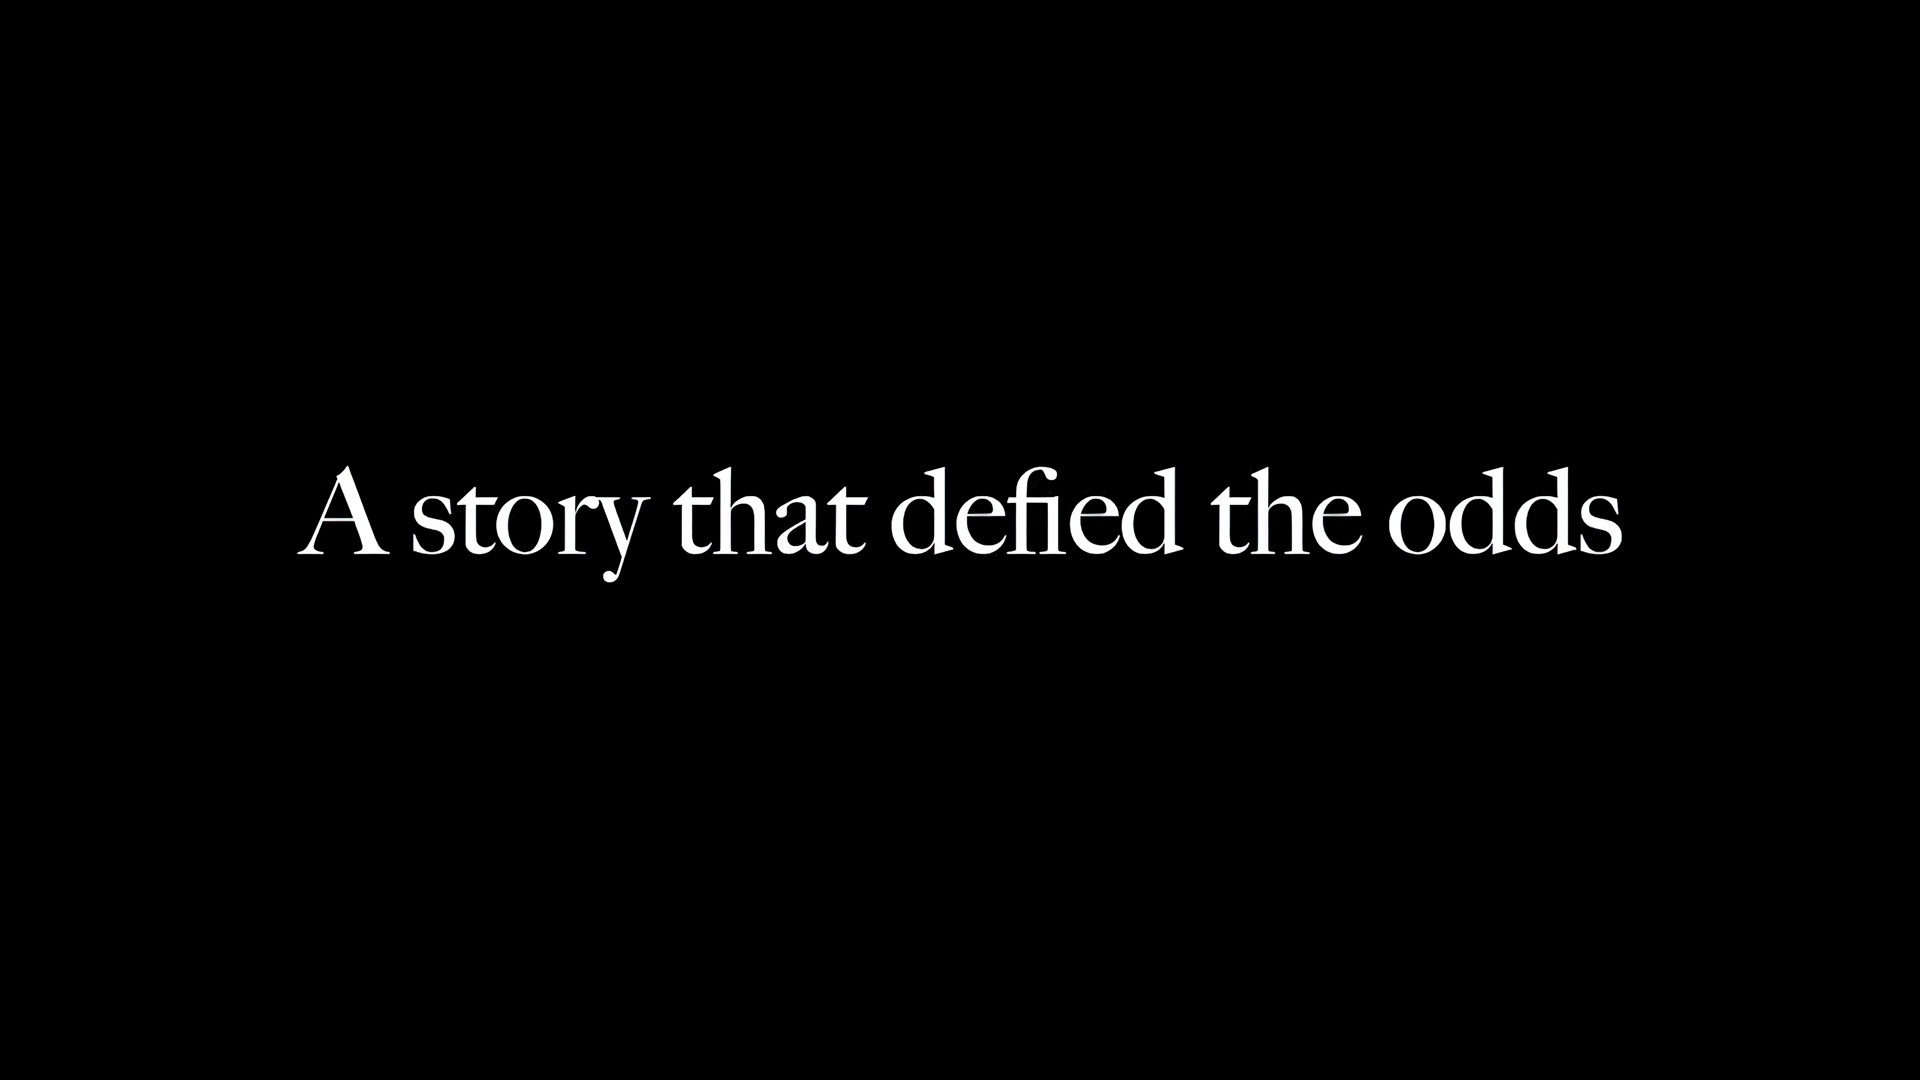 a-story-that-defied-the-odds-1920x1080.jpg